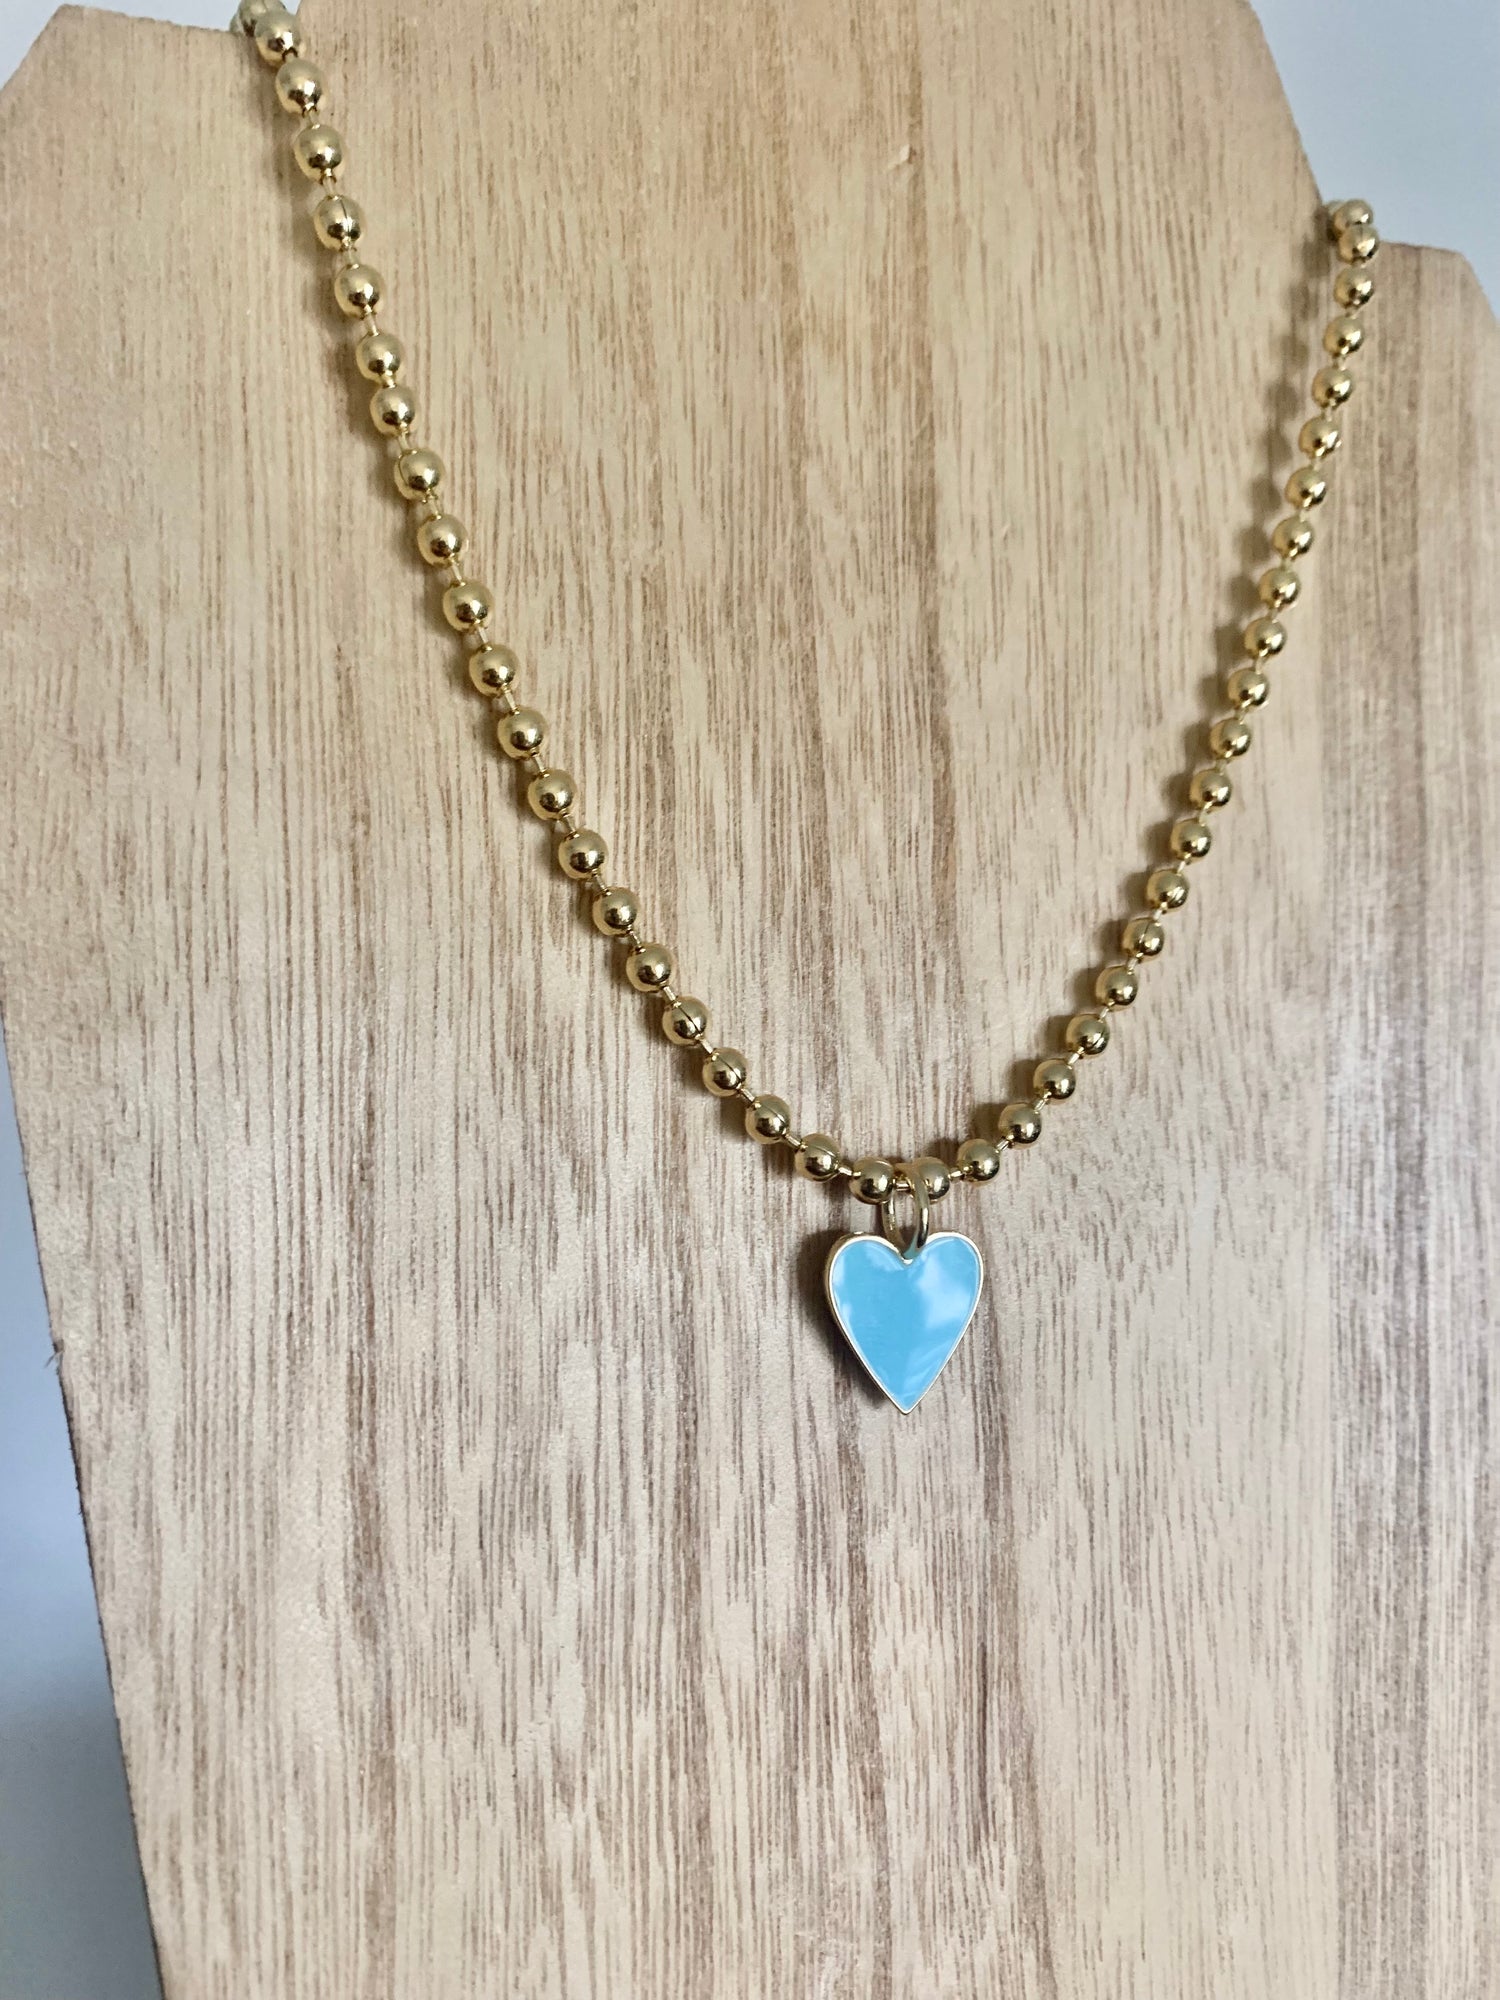 18 Karat Gold Plated Beaded Necklace with Enamel Heart Pendant on a 18 inch adjustable chain.